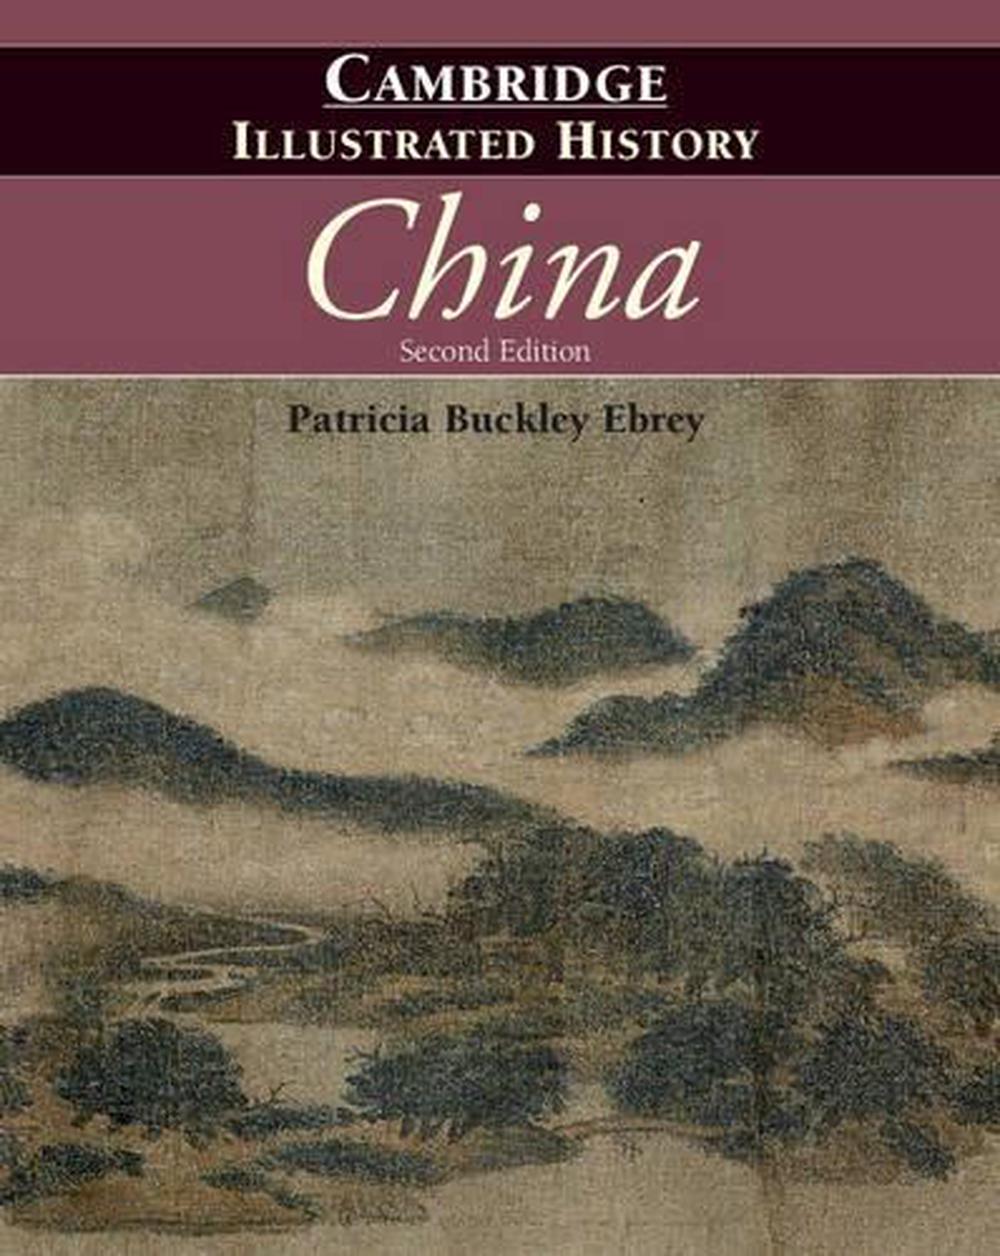 the cambridge illustrated history of china 2nd edition pdf download